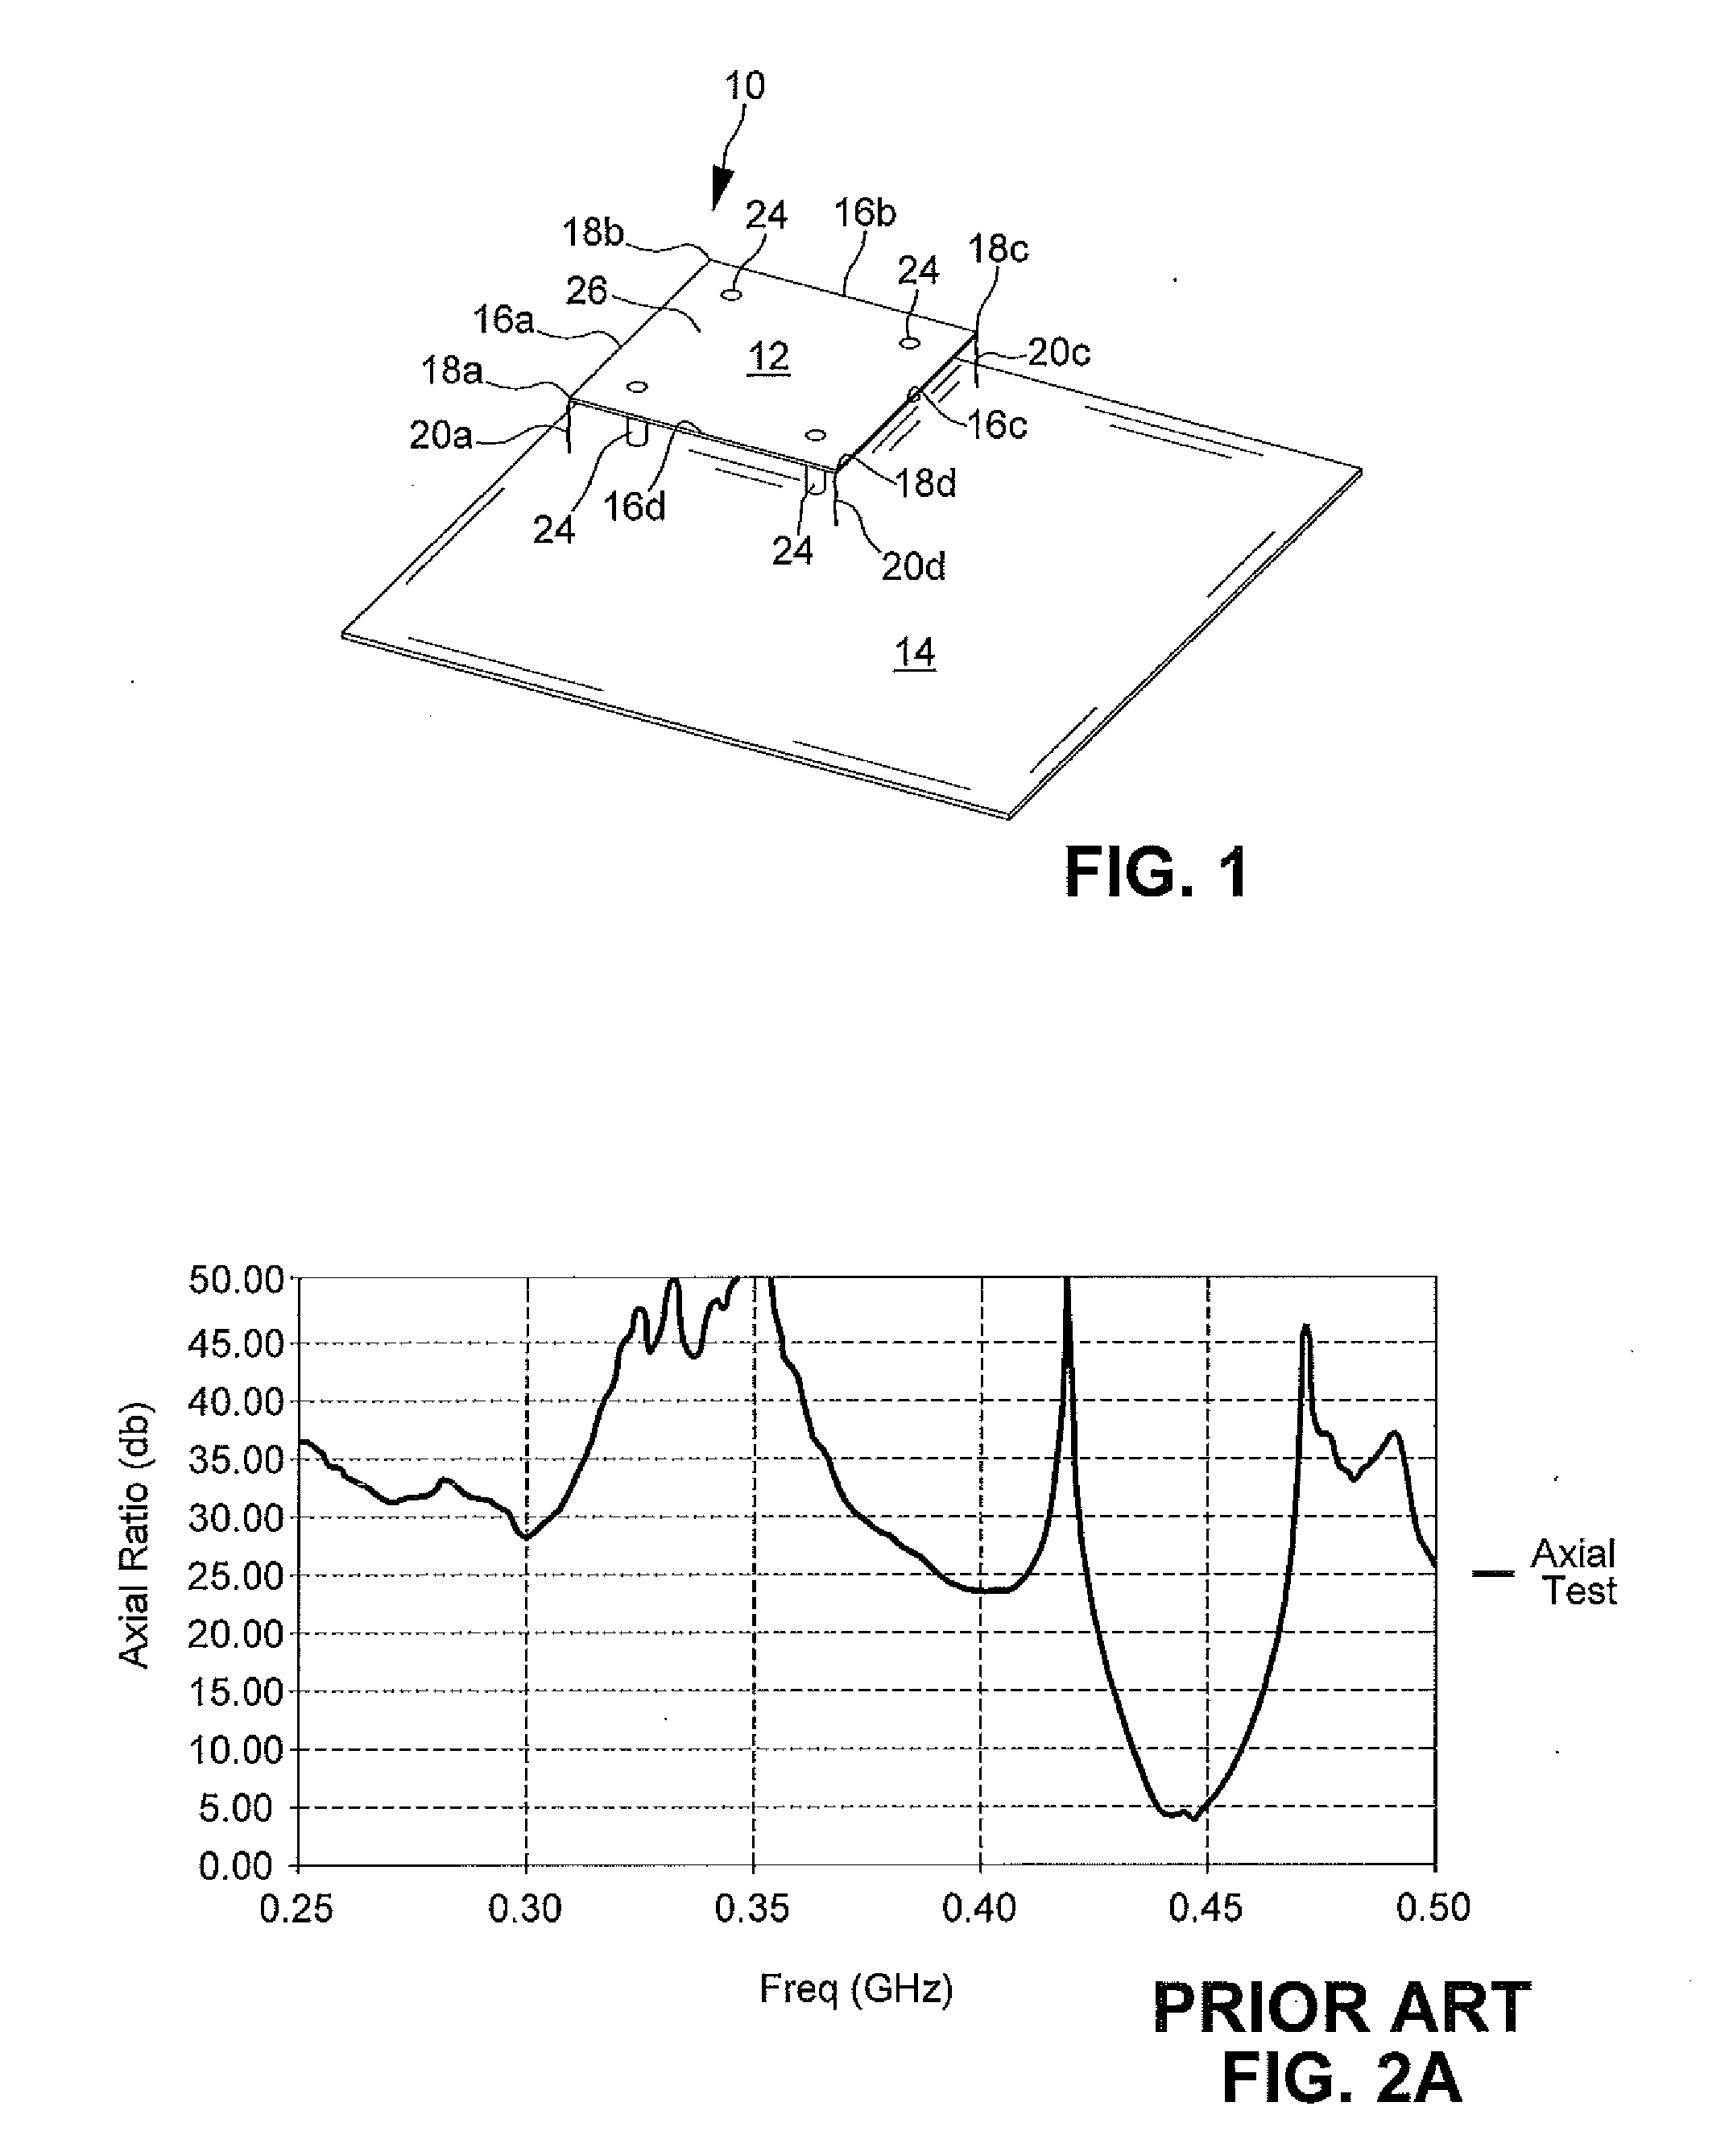 Frequency scalable low profile broadband quad-fed patch element and array